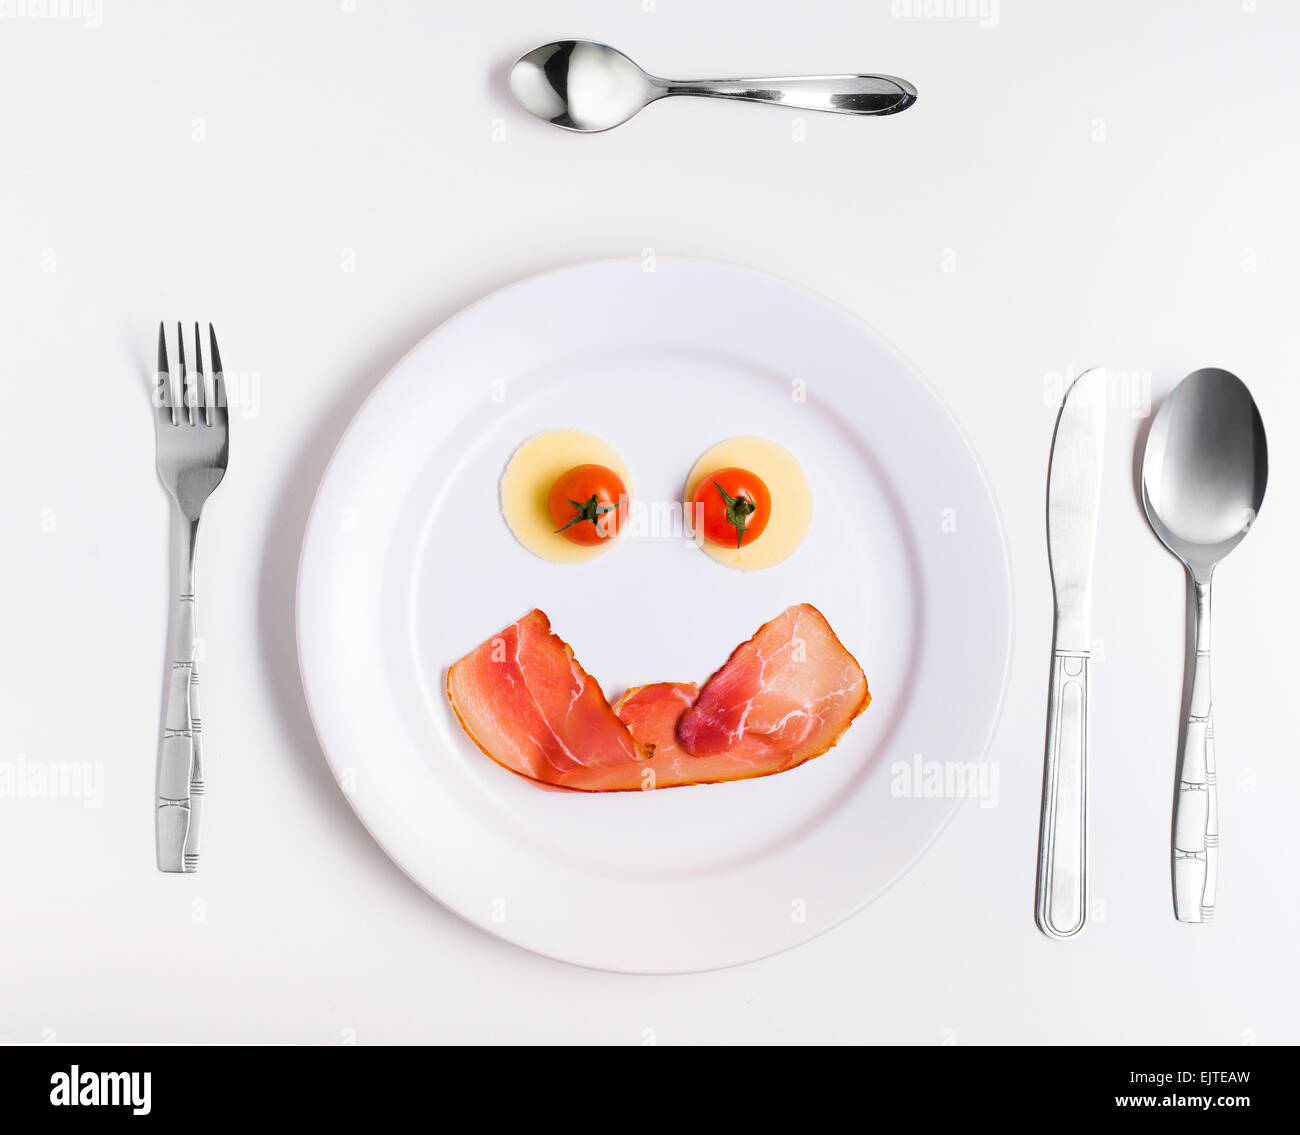 smiley face emoticon made from ham, cheese and tomatoes on a plate with cutlery Stock Photo